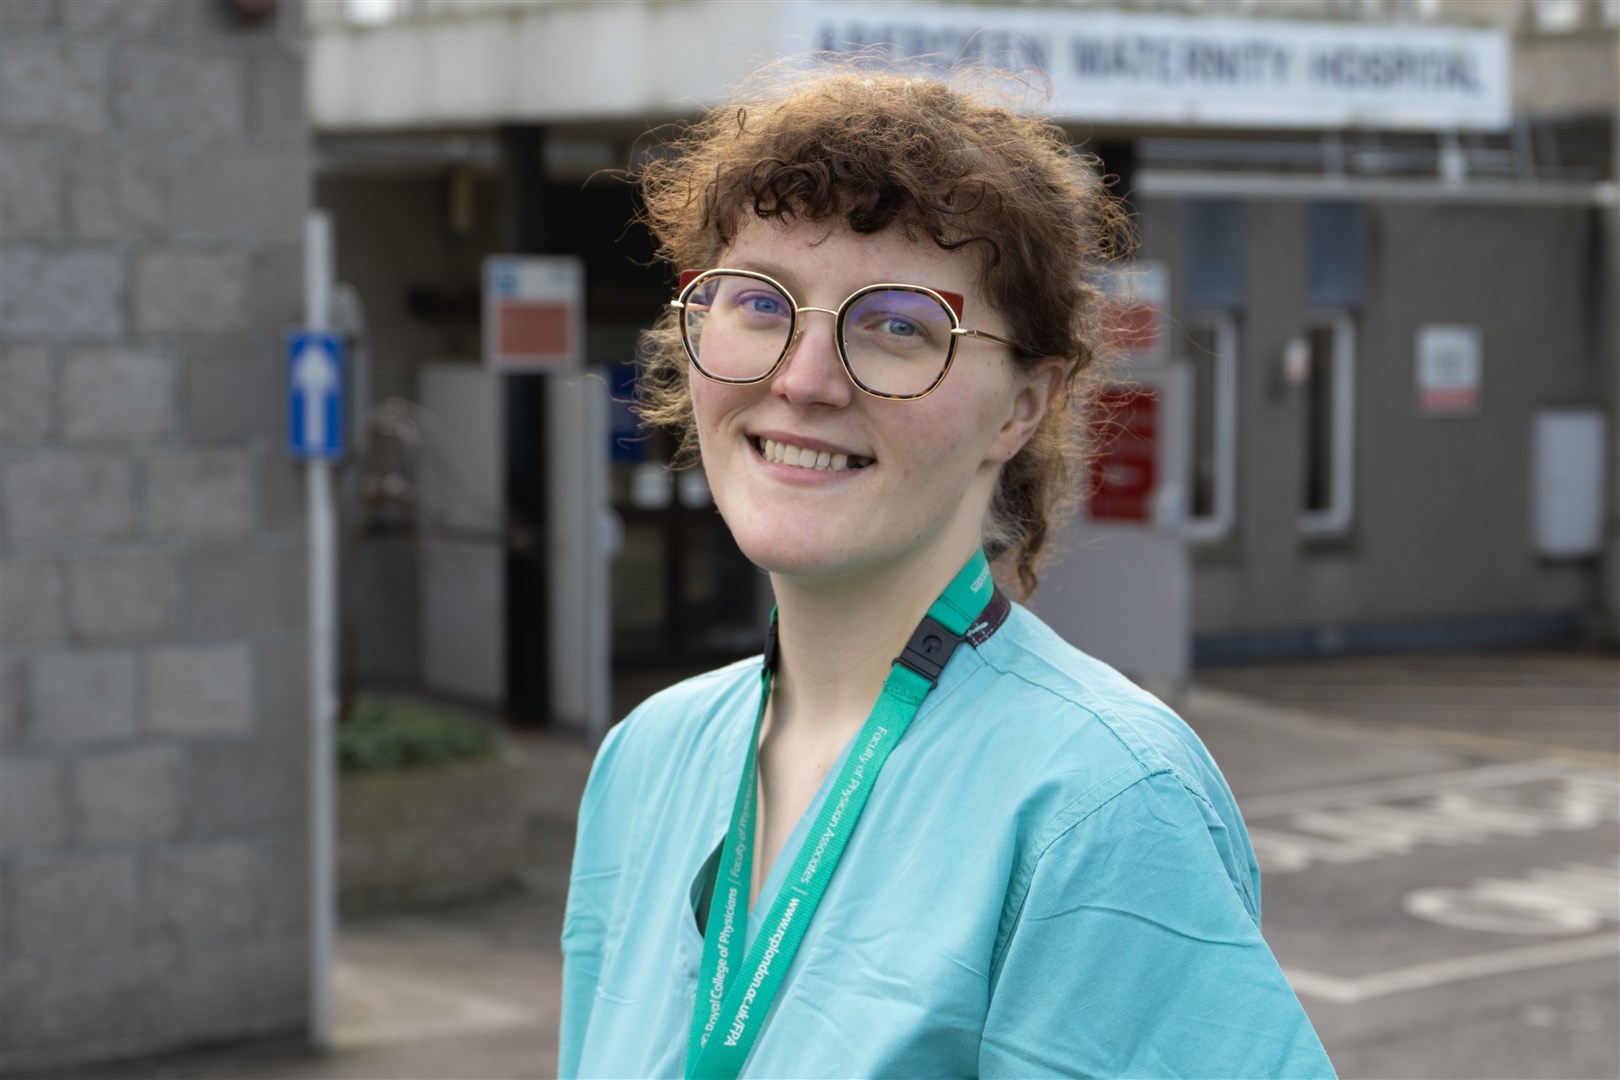 Charlotte has had a challenging journey to achieve her goals in medicine.